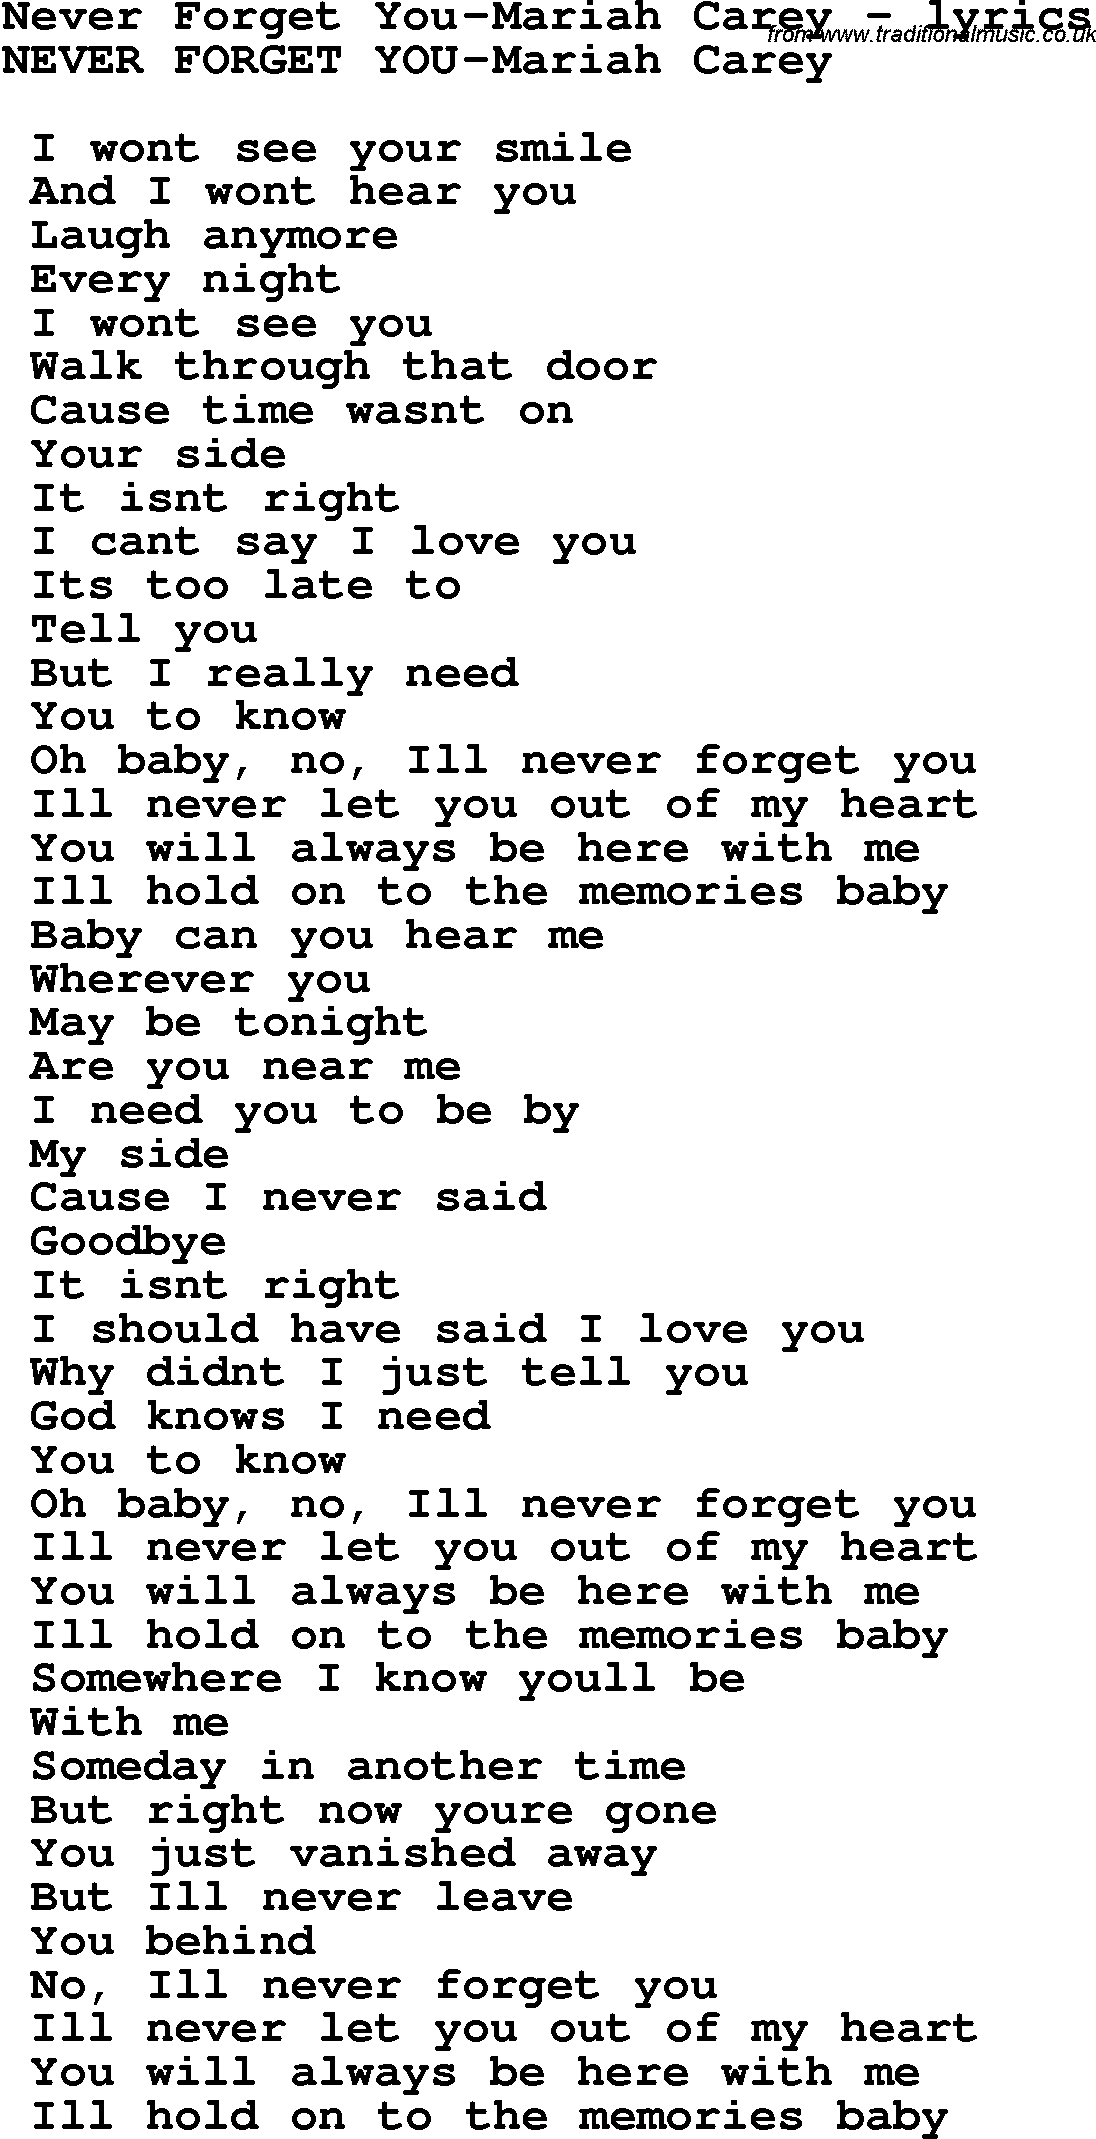 Love Song Lyrics for: Never Forget You-Mariah Carey